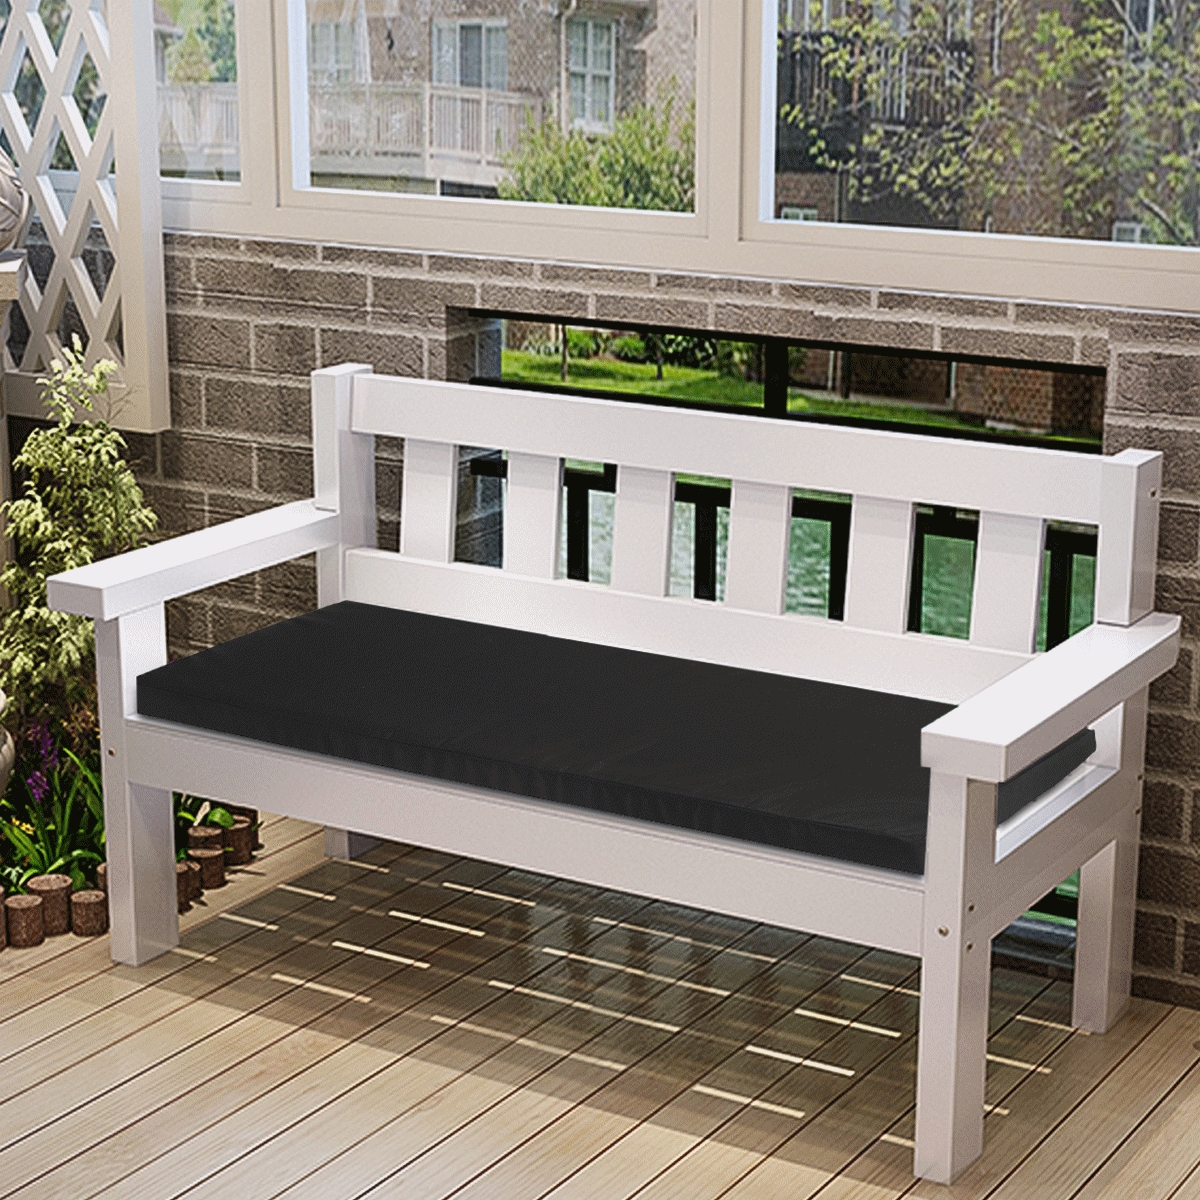 Home Bench Cushion In/Outdoor Patio Seat Pad Chair Swing Mat Furniture 2 Colors 